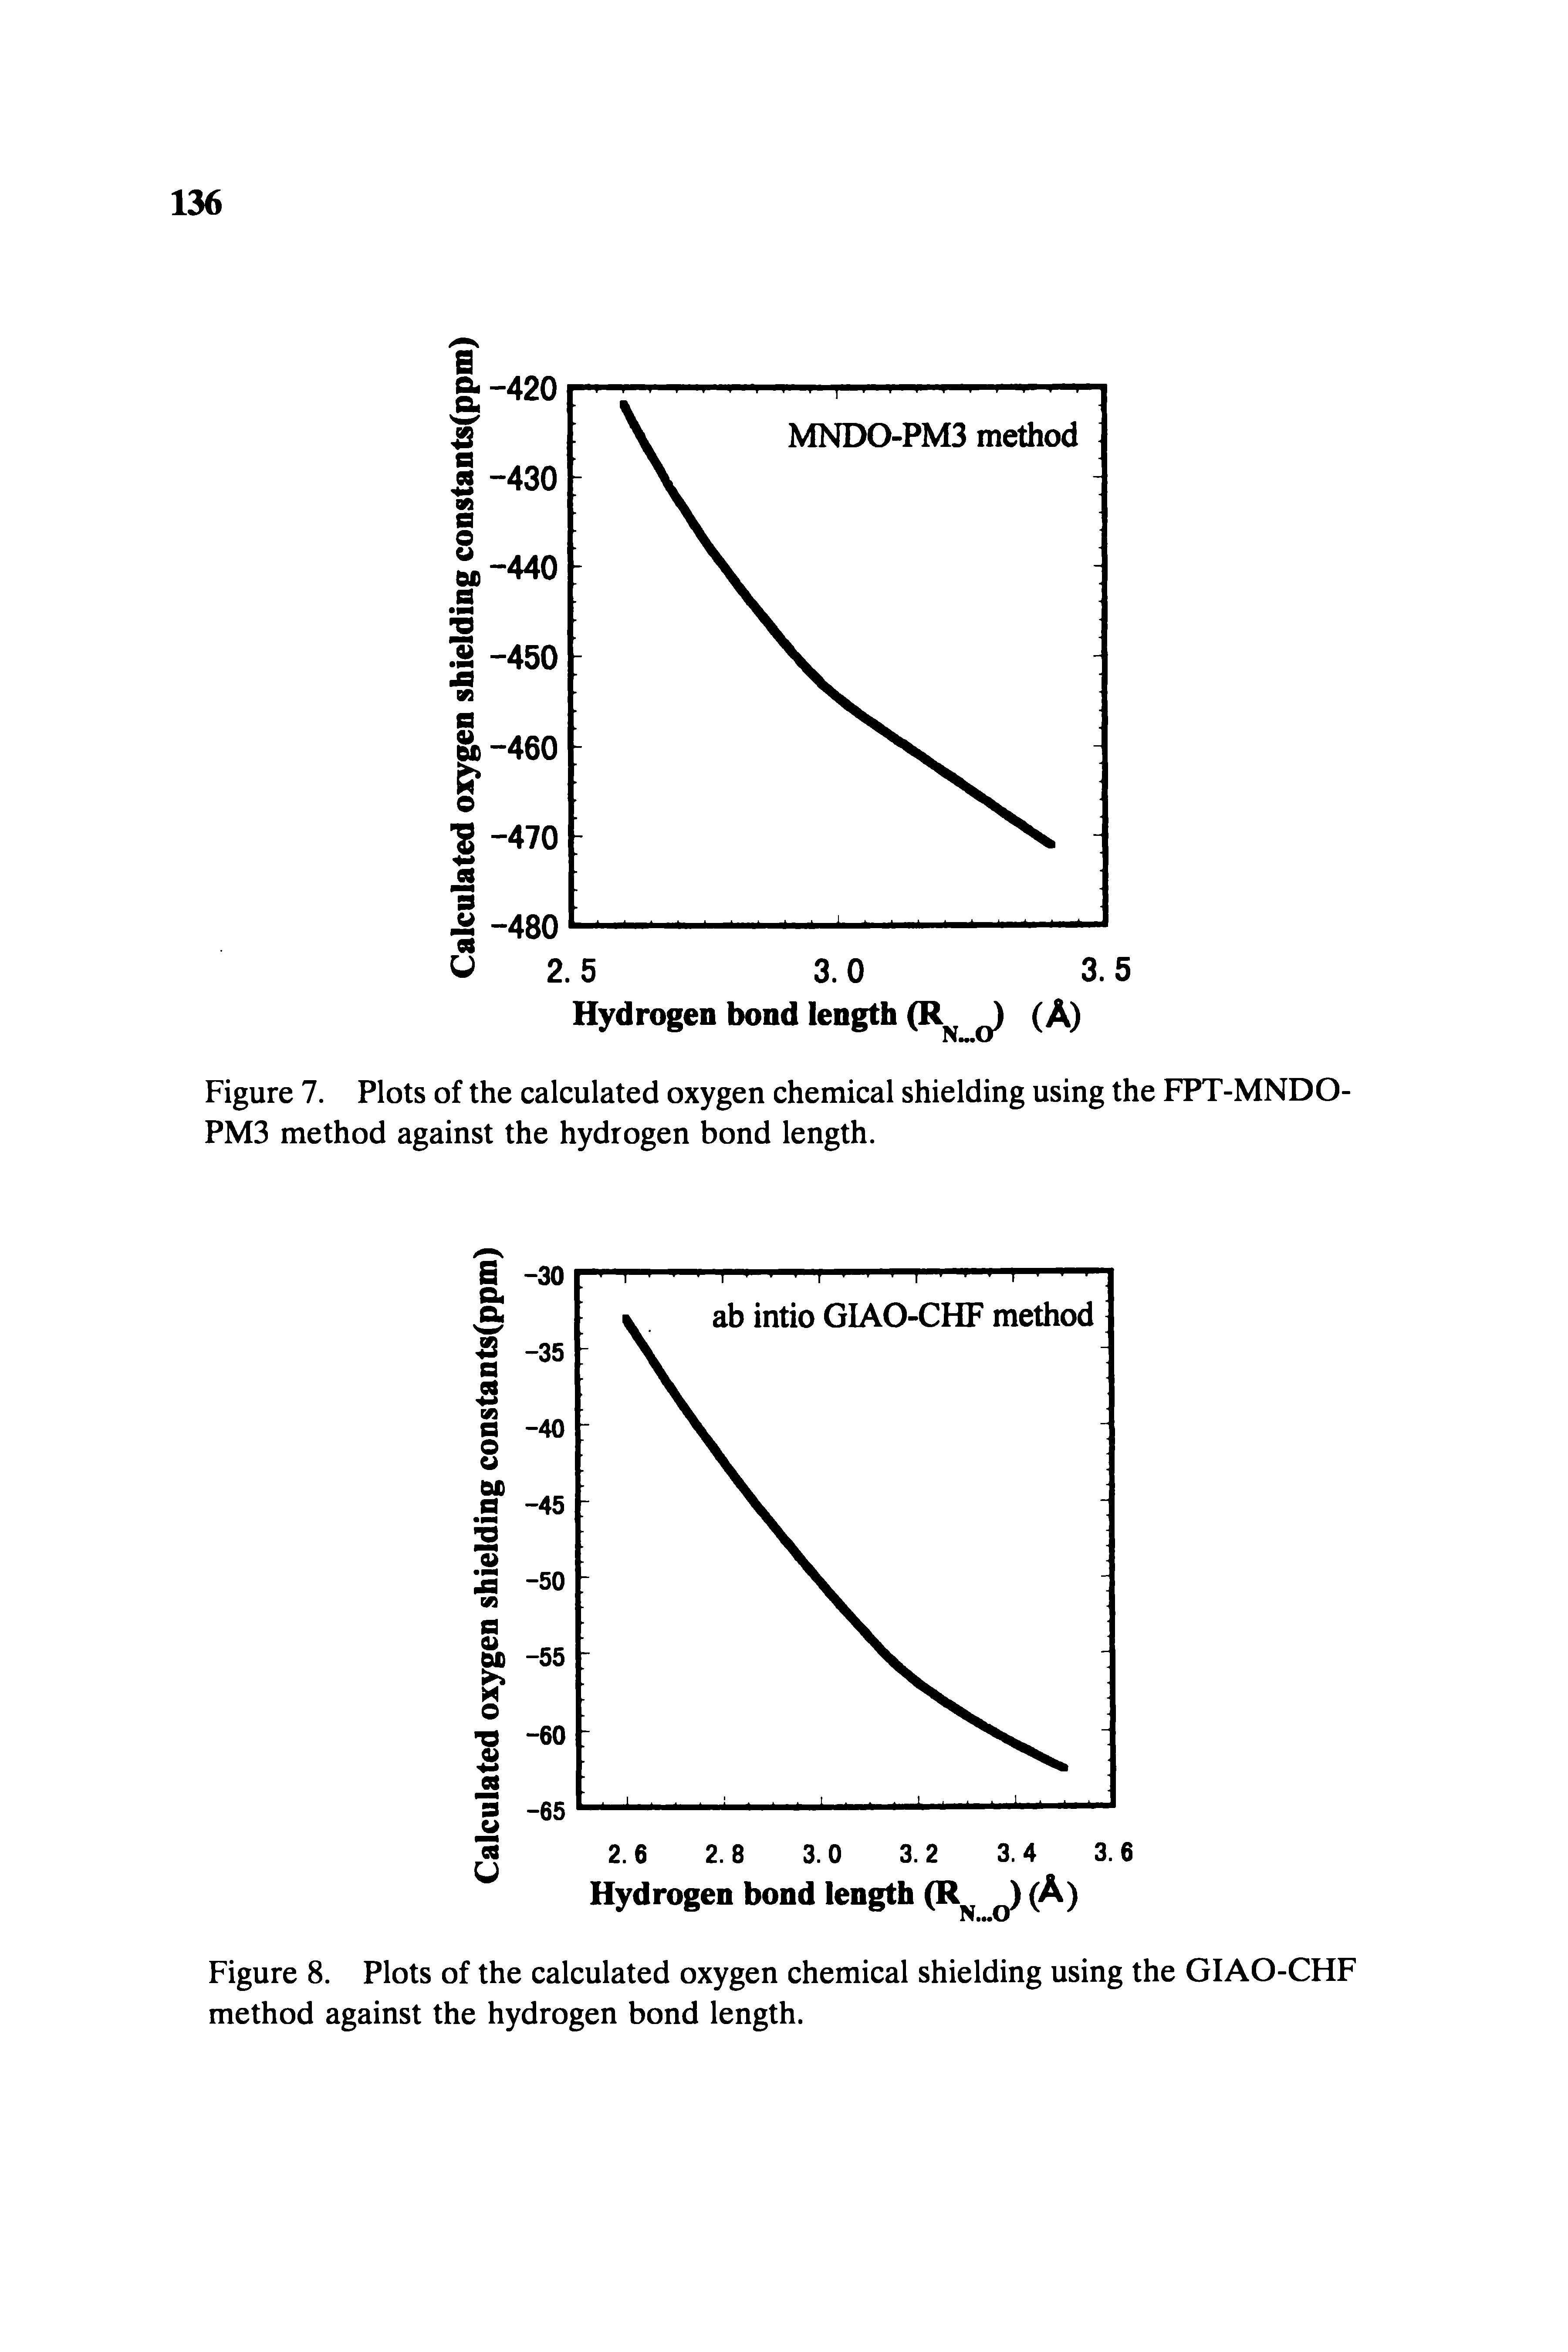 Figure 7. Plots of the calculated oxygen chemical shielding using the FPT-MNDO-PM3 method against the hydrogen bond length.